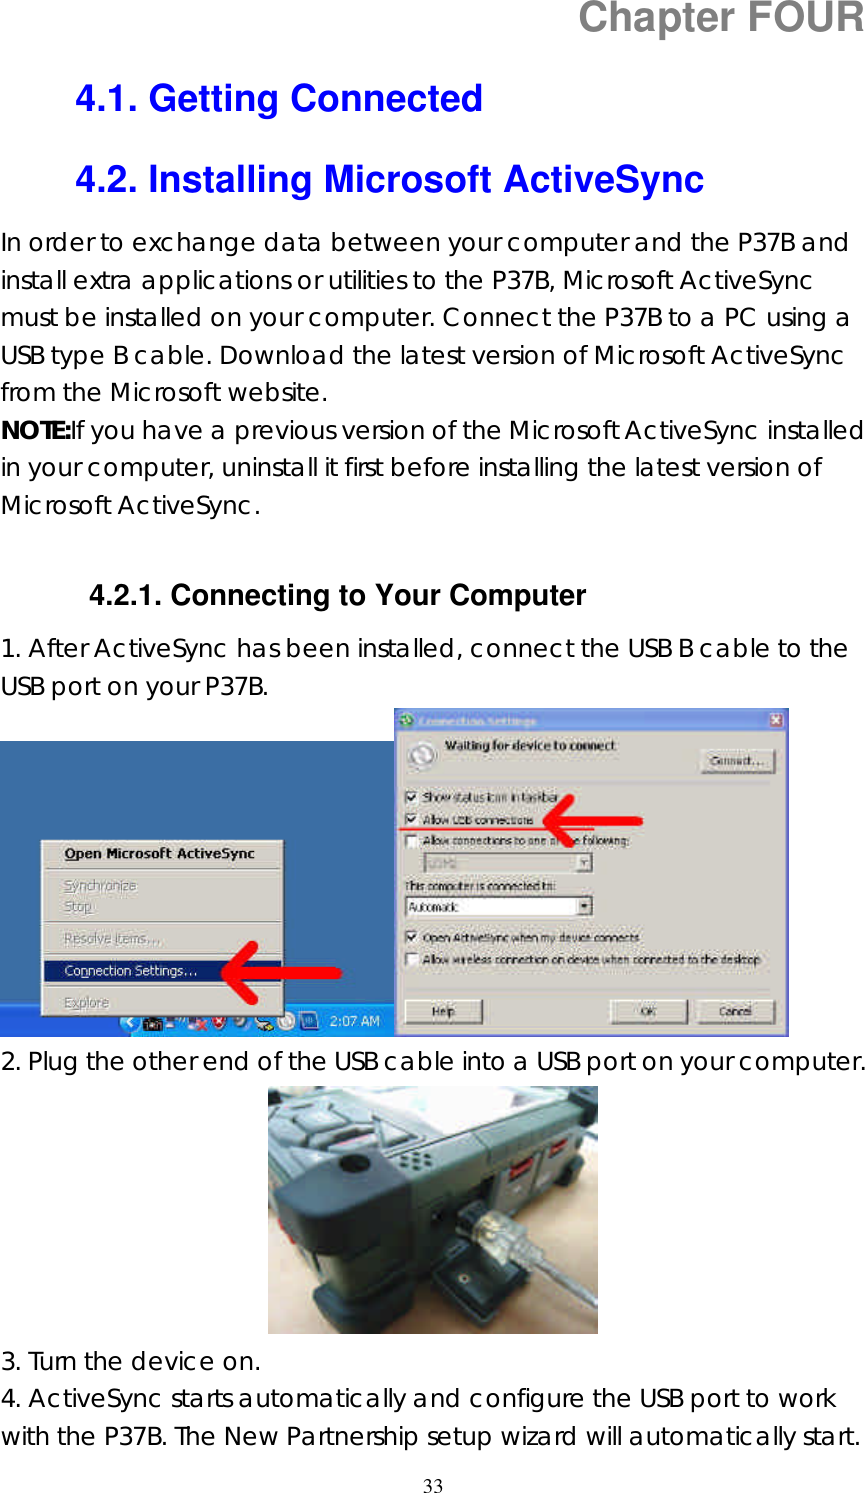  33Chapter FOUR 4.1. Getting Connected 4.2. Installing Microsoft ActiveSync In order to exchange data between your computer and the P37B and install extra applications or utilities to the P37B, Microsoft ActiveSync must be installed on your computer. Connect the P37B to a PC using a USB type B cable. Download the latest version of Microsoft ActiveSync from the Microsoft website. NOTE:If you have a previous version of the Microsoft ActiveSync installed in your computer, uninstall it first before installing the latest version of Microsoft ActiveSync.  4.2.1. Connecting to Your Computer 1. After ActiveSync has been installed, connect the USB B cable to the USB port on your P37B.    2. Plug the other end of the USB cable into a USB port on your computer.  3. Turn the device on. 4. ActiveSync starts automatically and configure the USB port to work with the P37B. The New Partnership setup wizard will automatically start. 